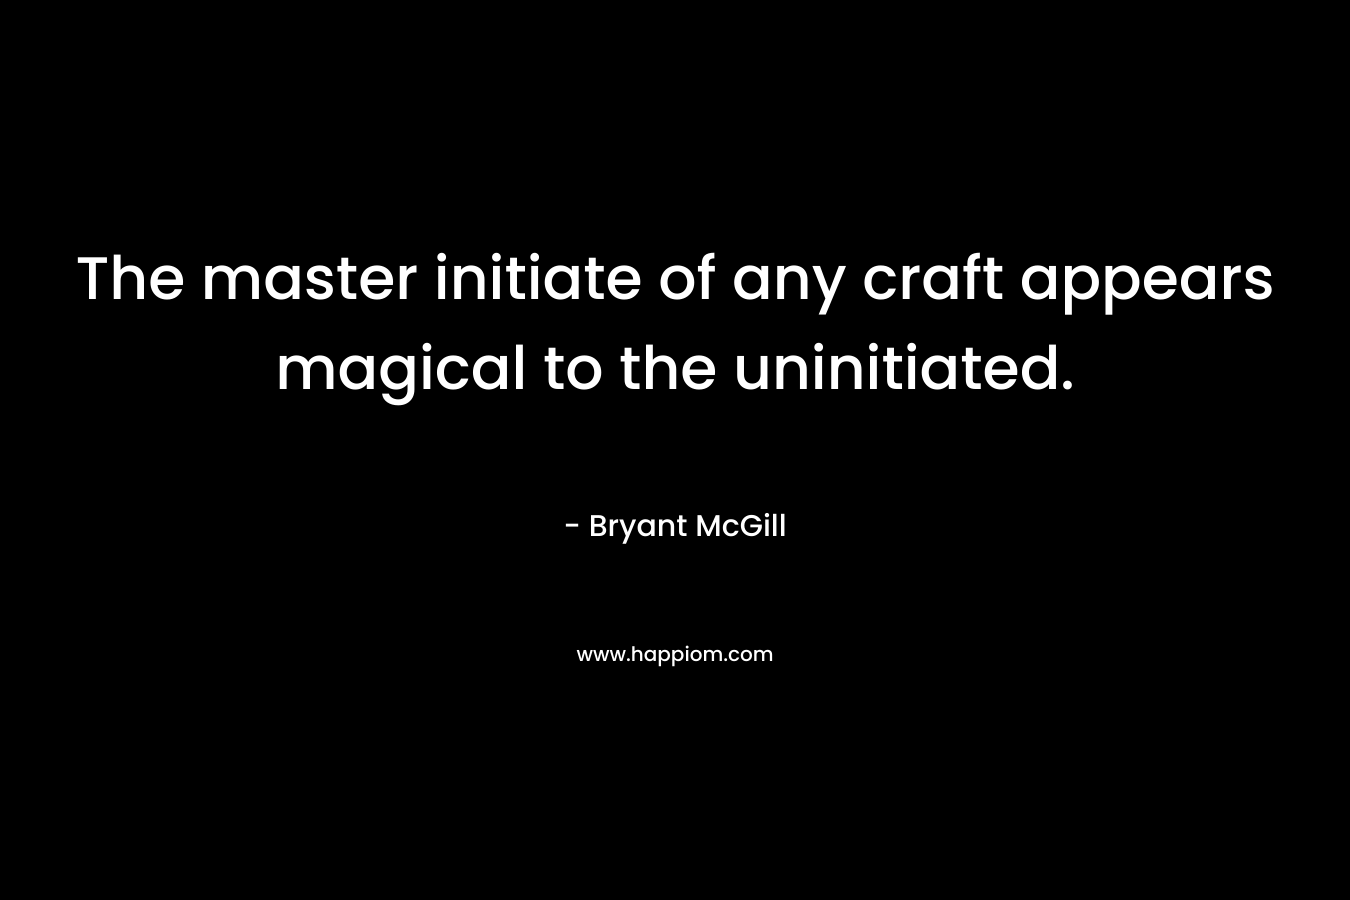 The master initiate of any craft appears magical to the uninitiated. – Bryant McGill